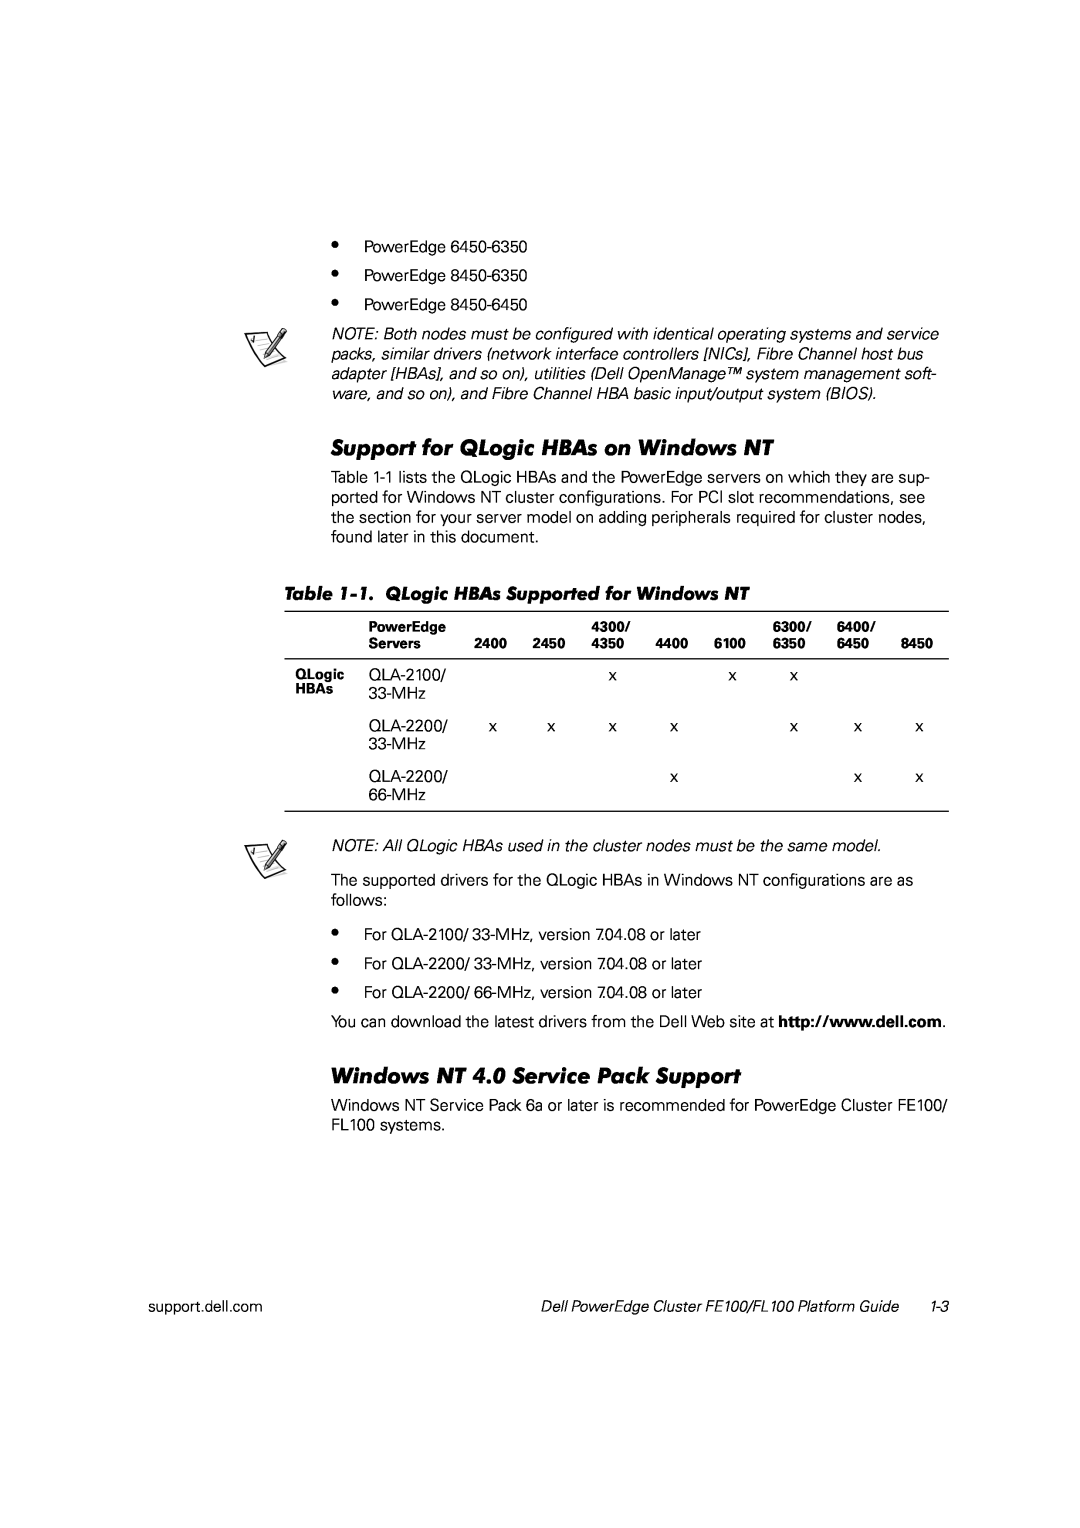 Dell FL100, FE100 manual Support for QLogic HBAs on Windows NT, Windows NT 4.0 Service Pack Support 